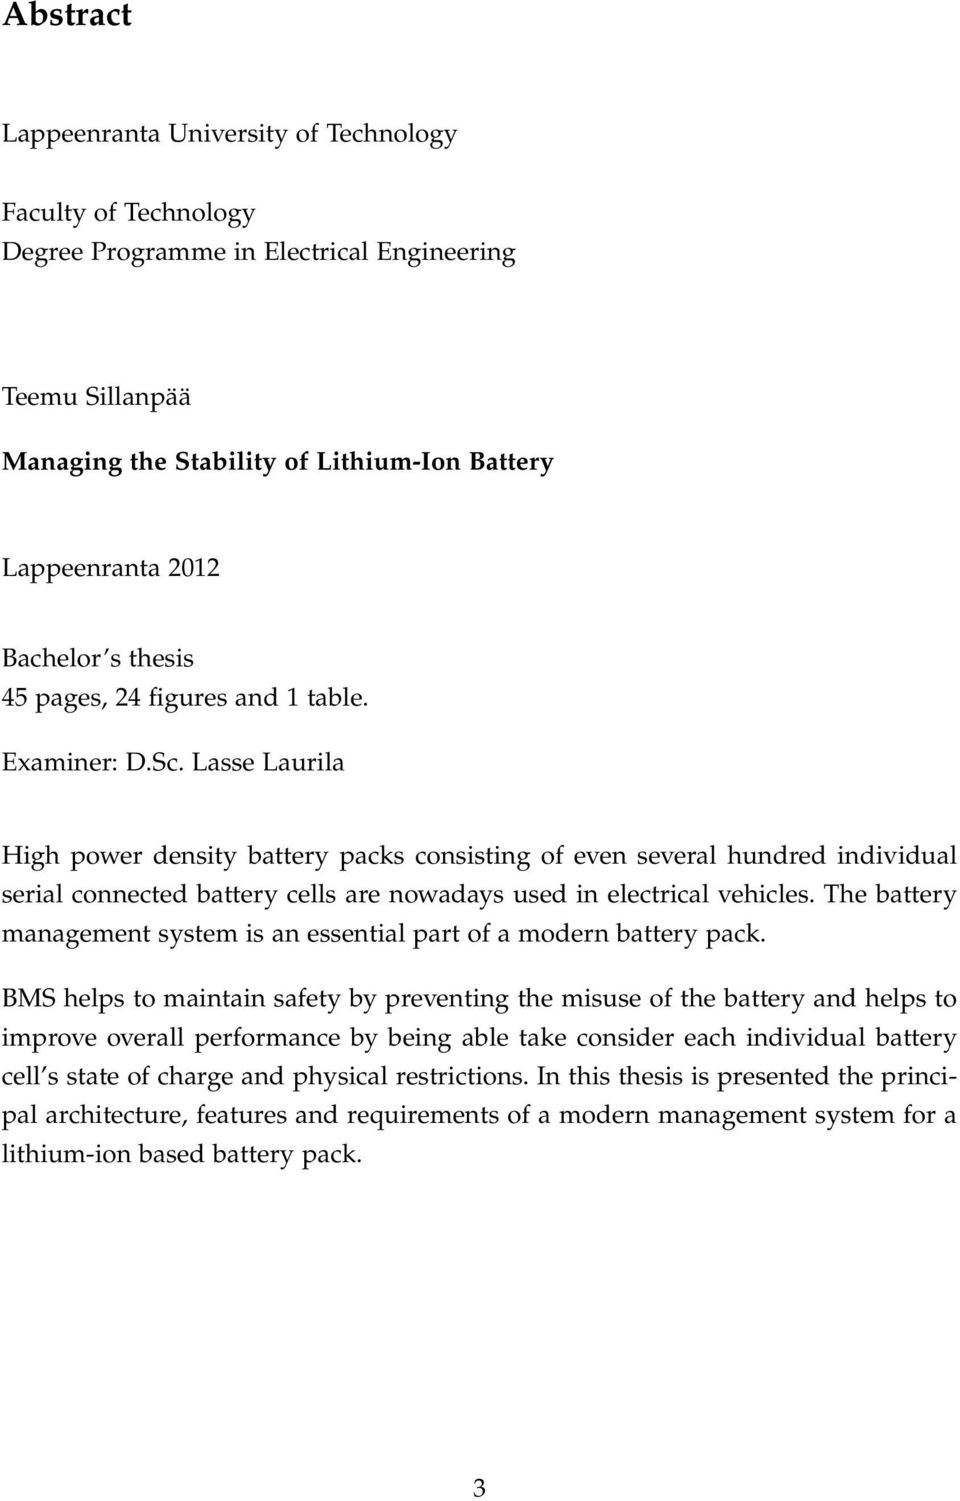 Lasse Laurila High power density battery packs consisting of even several hundred individual serial connected battery cells are nowadays used in electrical vehicles.